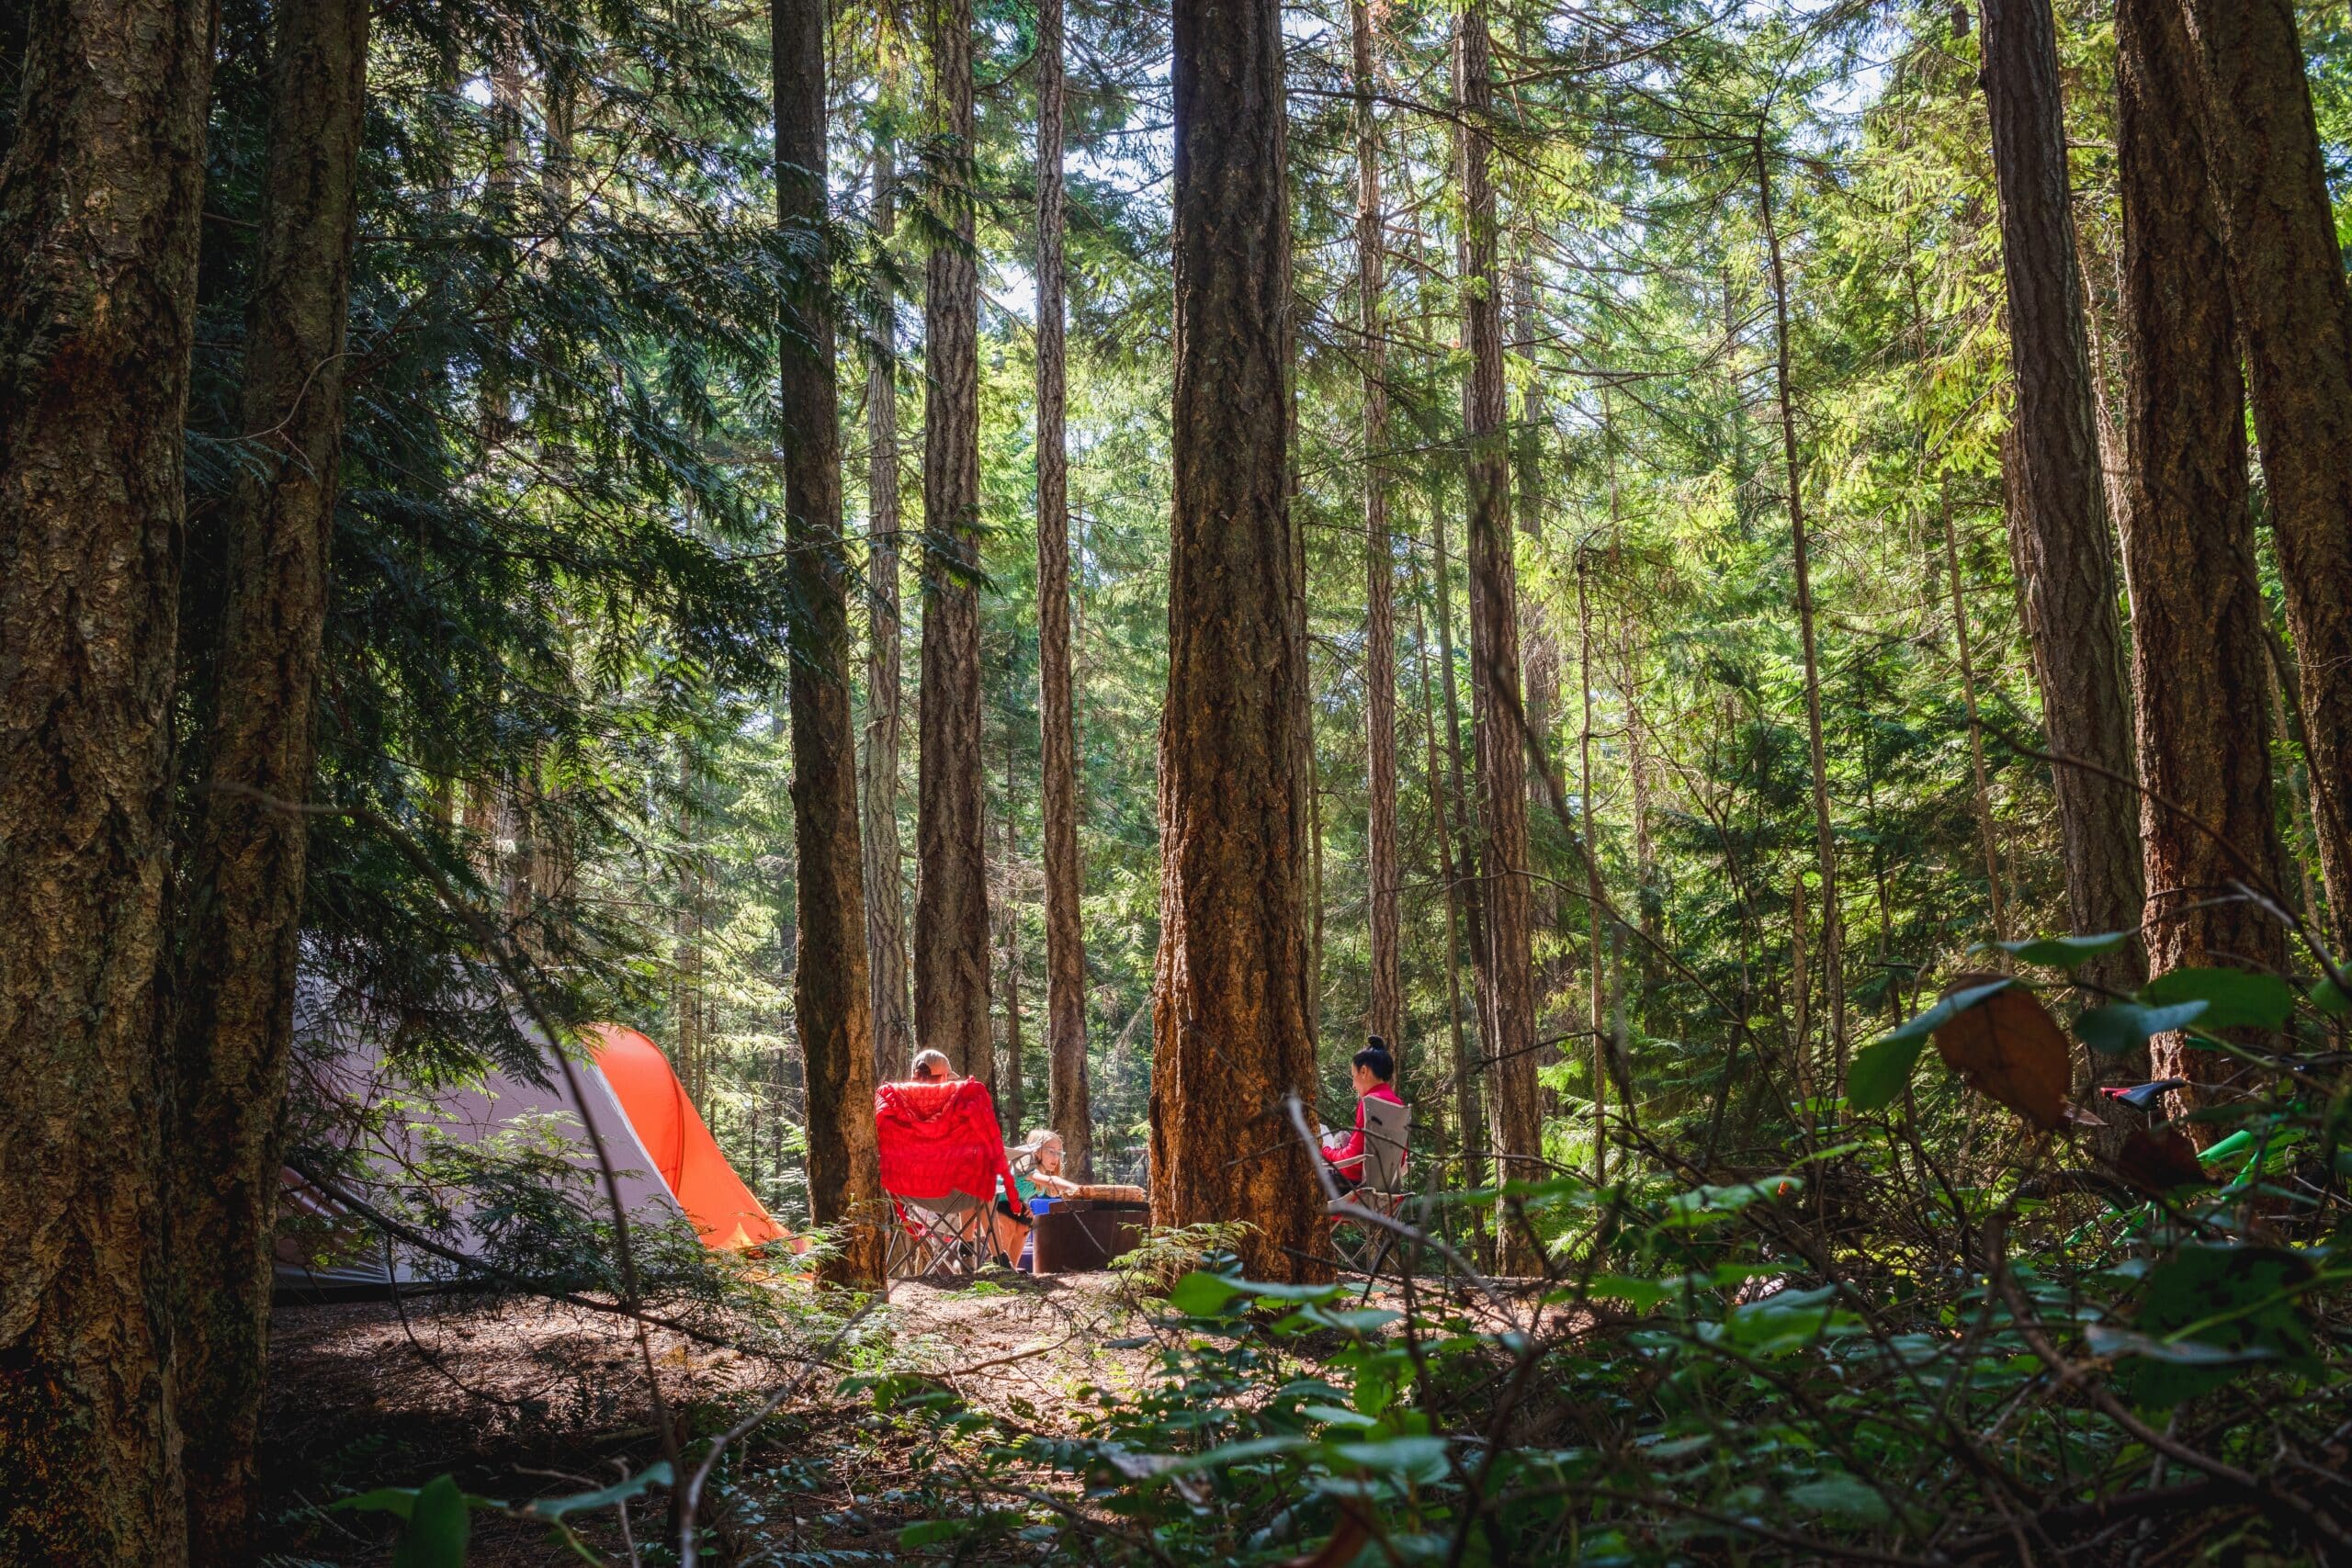 Family enjoying nature outdoors camping in the forest.